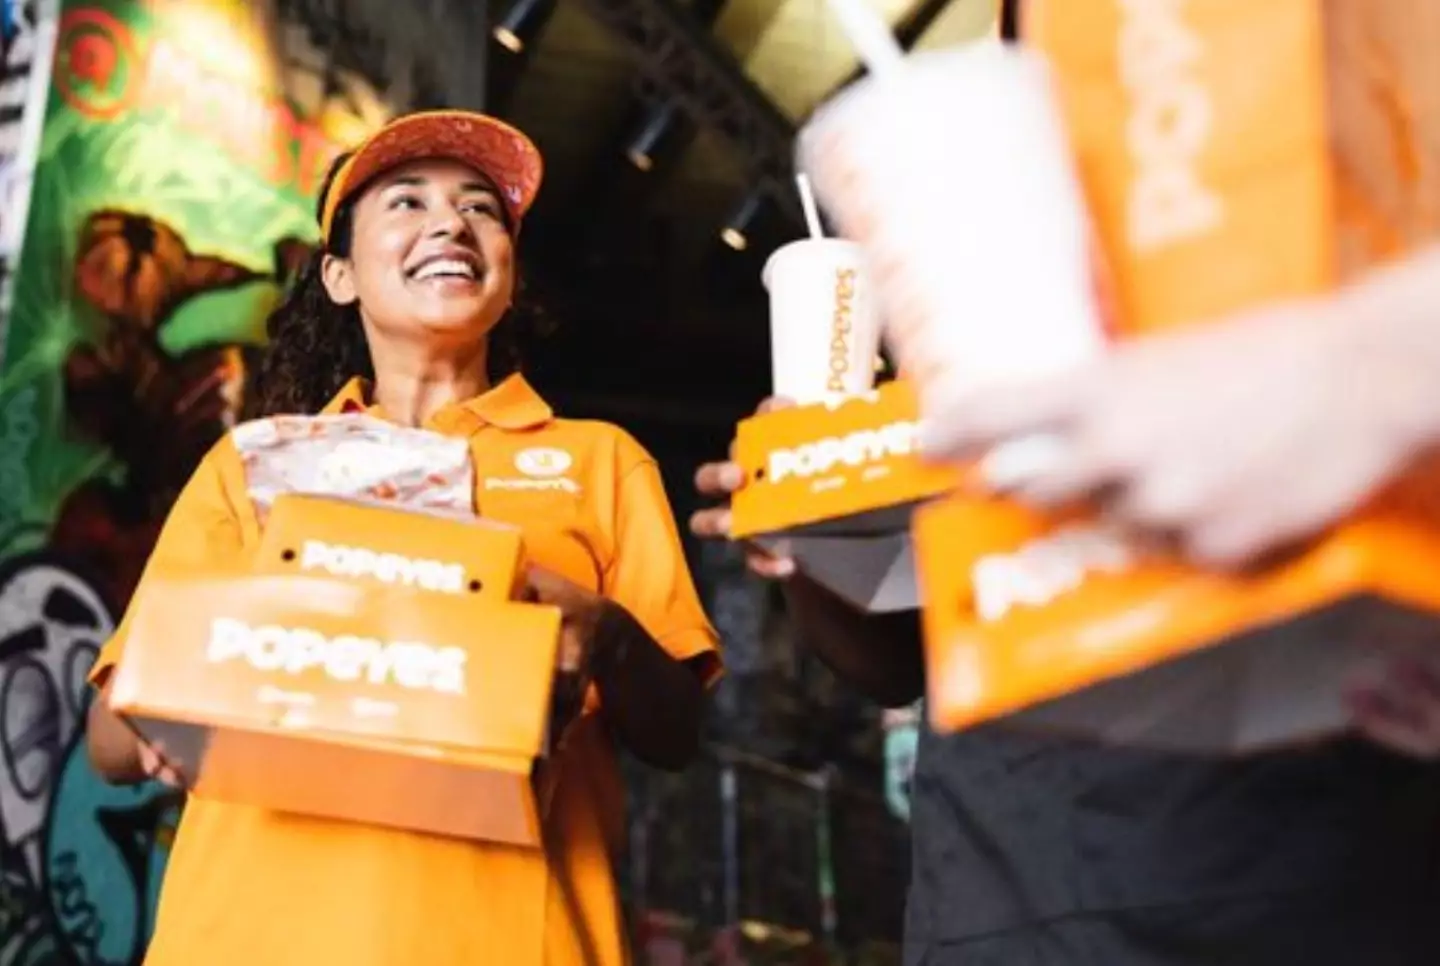 Popeyes is opening drive-thru restaurants in the UK.